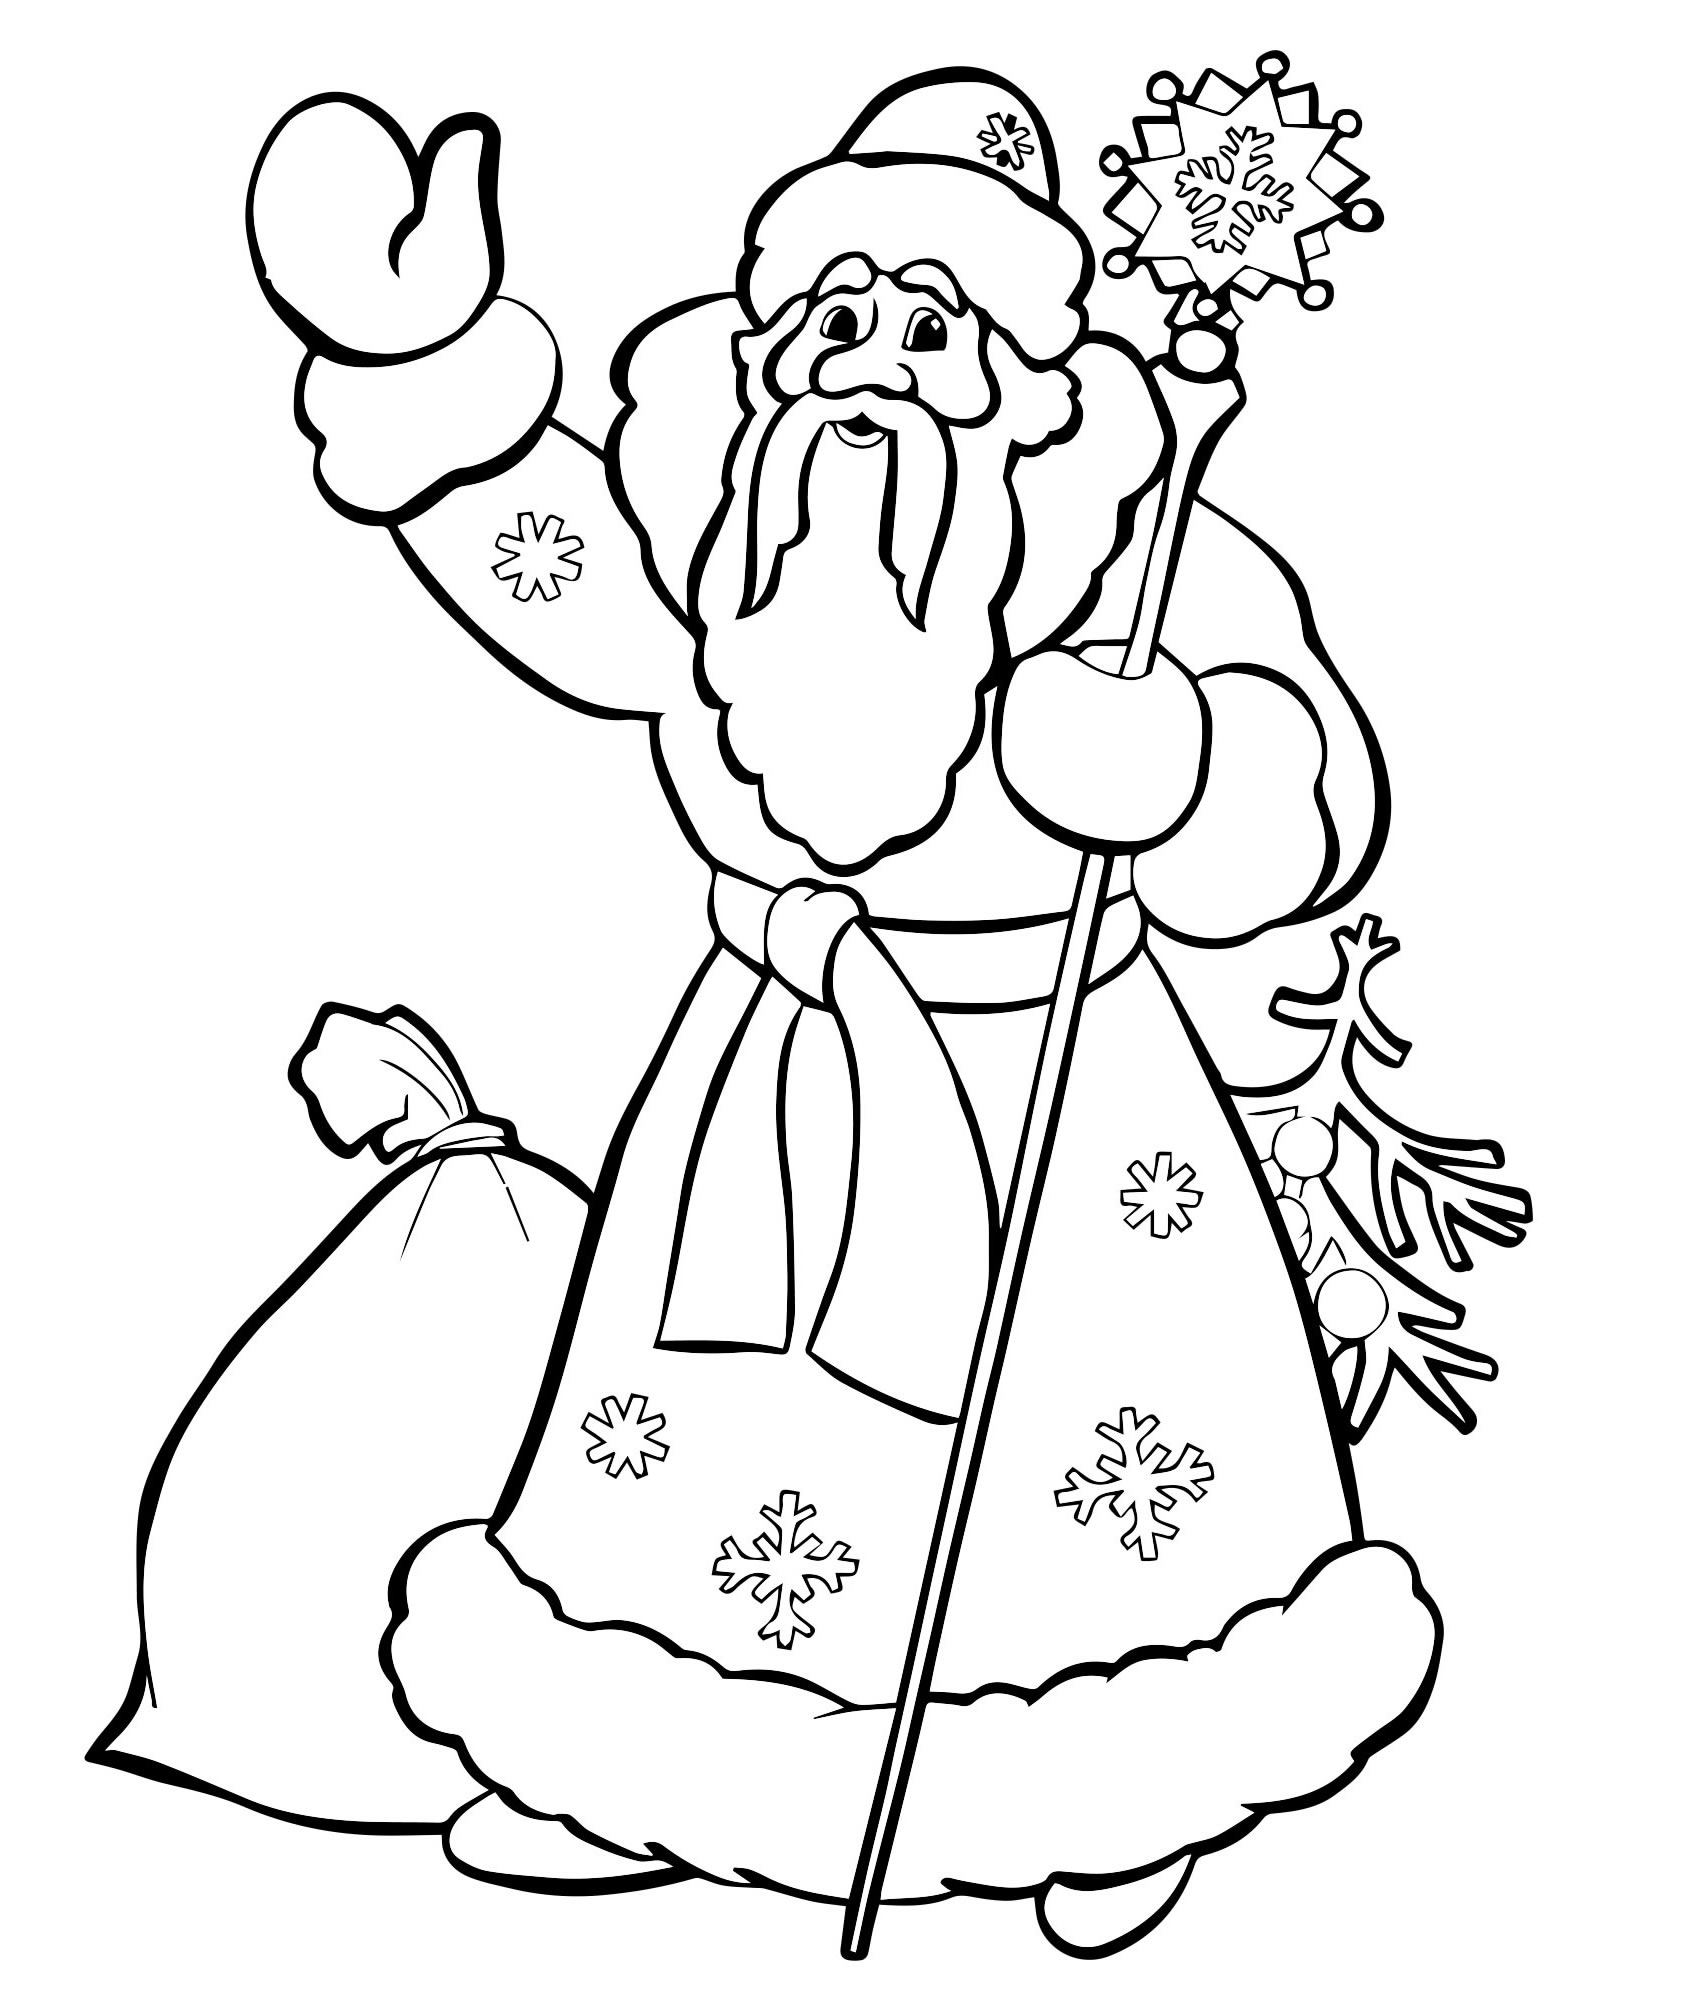 Animated drawing of Santa Claus and Snow Maiden